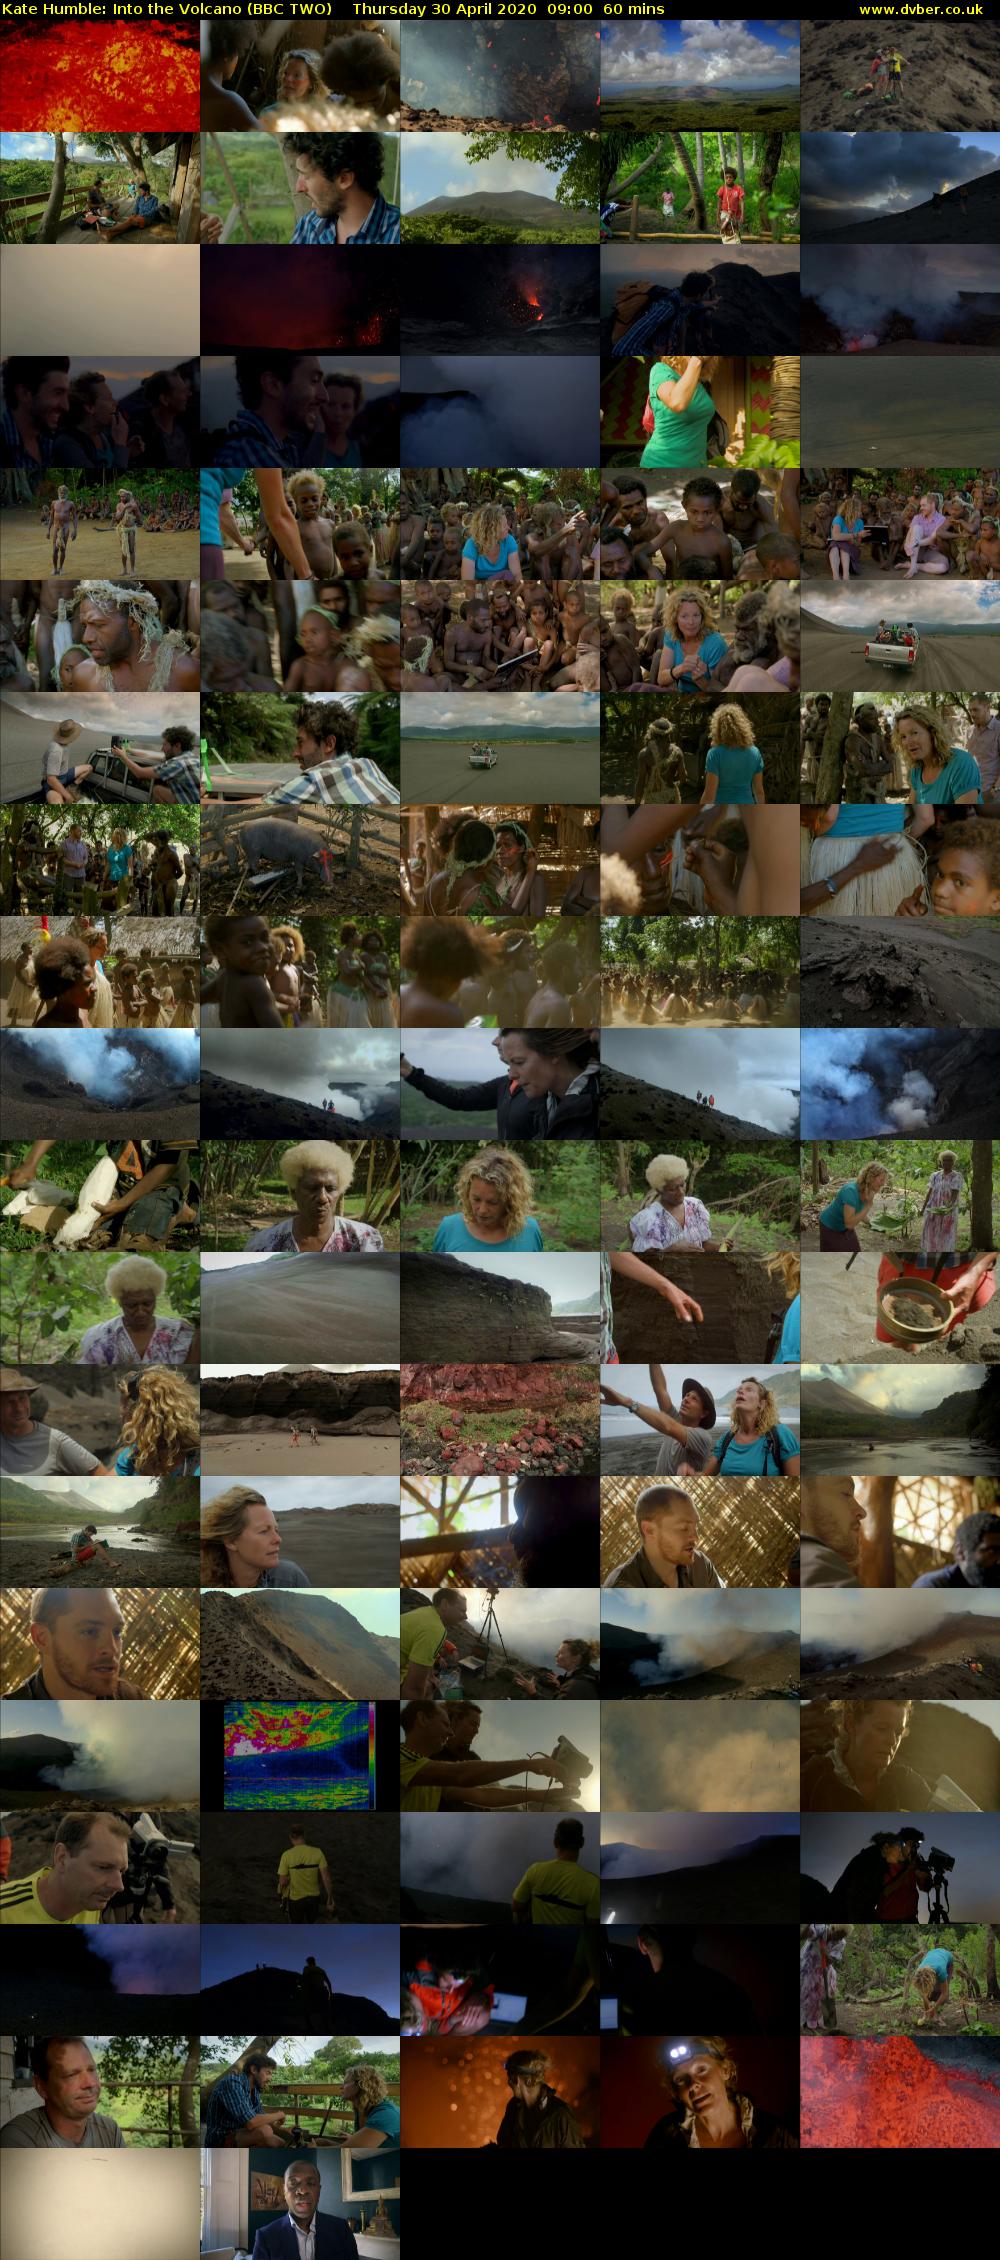 Kate Humble: Into the Volcano (BBC TWO) Thursday 30 April 2020 09:00 - 10:00